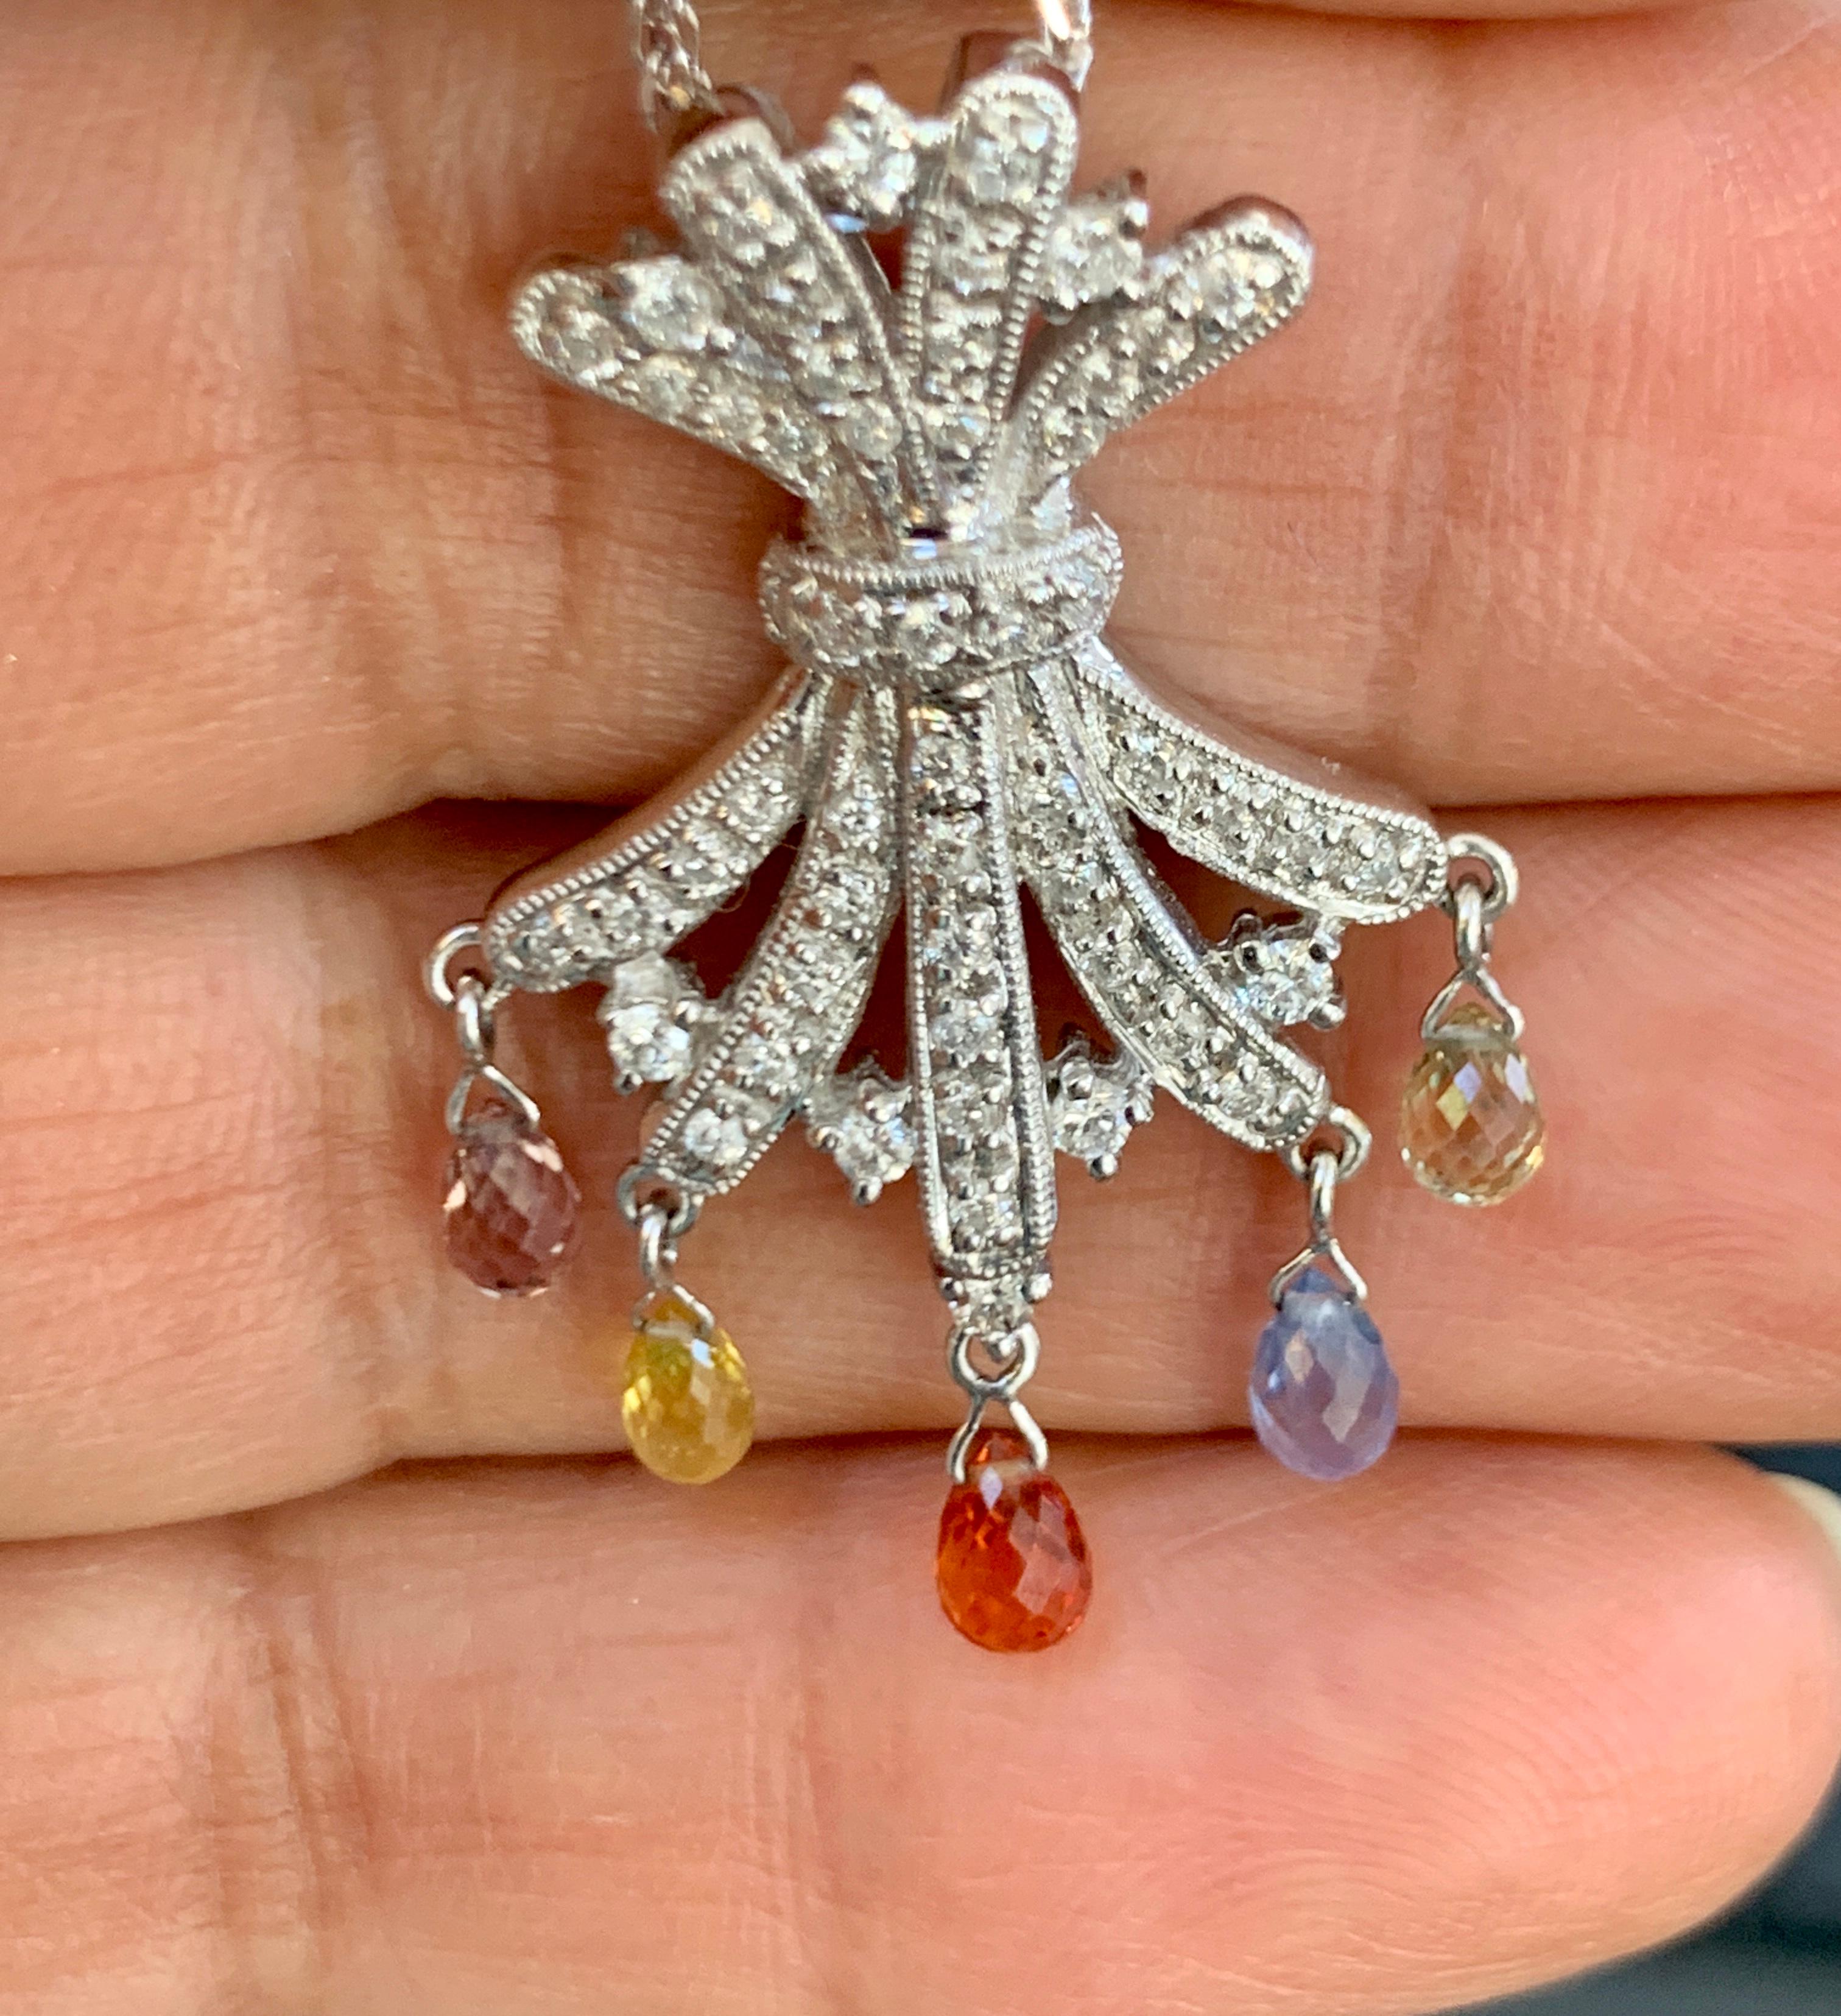 Approximately  1.5 Carat Multi Sapphire   Briolettes Pendant /Necklace 18 Kt White  Gold Estate, 
This spectacular Pendant Necklace  consisting of Multi color of natural sapphires  Briolettes
very clean Stone no inclusion   , full of luster and